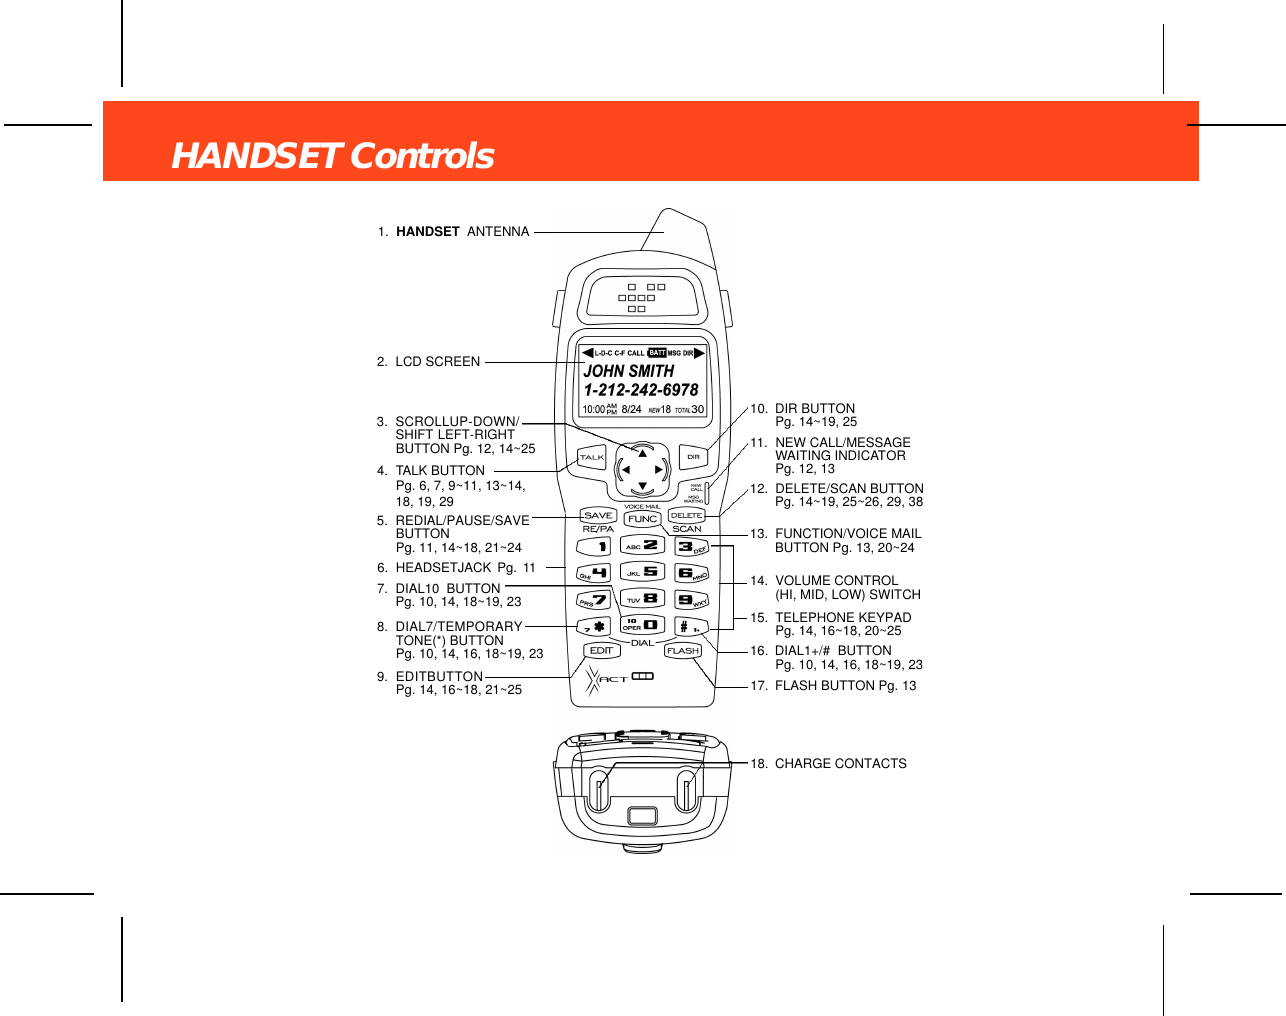 HANDSET Controls11. NEW CALL/MESSAGEWAITING INDICATORPg. 12, 132. LCD SCREEN1. HANDSET ANTENNA4. TALK BUTTON Pg. 6, 7, 9~11, 13~14,18, 19, 293. SCROLLUP-DOWN/SHIFT LEFT-RIGHTBUTTON Pg. 12, 14~2514. VOLUME CONTROL(HI, MID, LOW) SWITCH7. DIAL10 BUTTONPg. 10, 14, 18~19, 238. DIAL7/TEMPORARYTONE(*) BUTTONPg. 10, 14, 16, 18~19, 235. REDIAL/PAUSE/SAVEBUTTON Pg. 11, 14~18, 21~249. EDITBUTTONPg. 14, 16~18, 21~2510. DIR BUTTON Pg. 14~19, 2513. FUNCTION/VOICE MAILBUTTON Pg. 13, 20~246. HEADSETJACK Pg. 1117. FLASH BUTTON Pg. 1318. CHARGE CONTACTS15. TELEPHONE KEYPADPg. 14, 16~18, 20~2516. DIAL1+/# BUTTONPg. 10, 14, 16, 18~19, 2312. DELETE/SCAN BUTTONPg. 14~19, 25~26, 29, 38